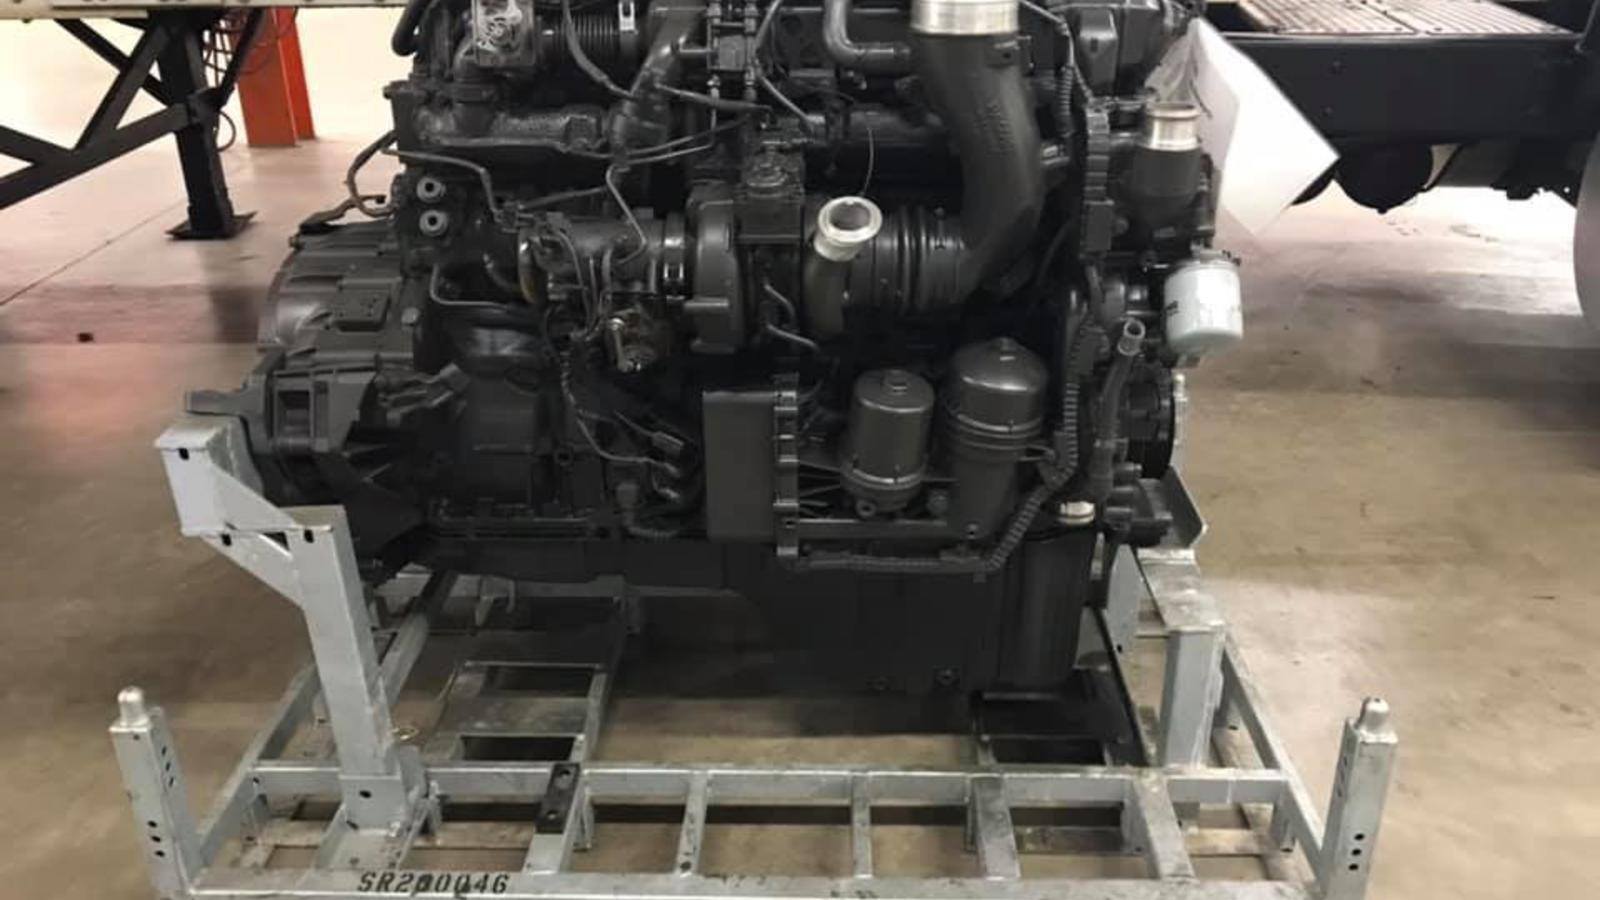 Tri-State Kenworth generously donated this Paccar MX-13 diesel engine to Lincoln Tech for instructional purposes.